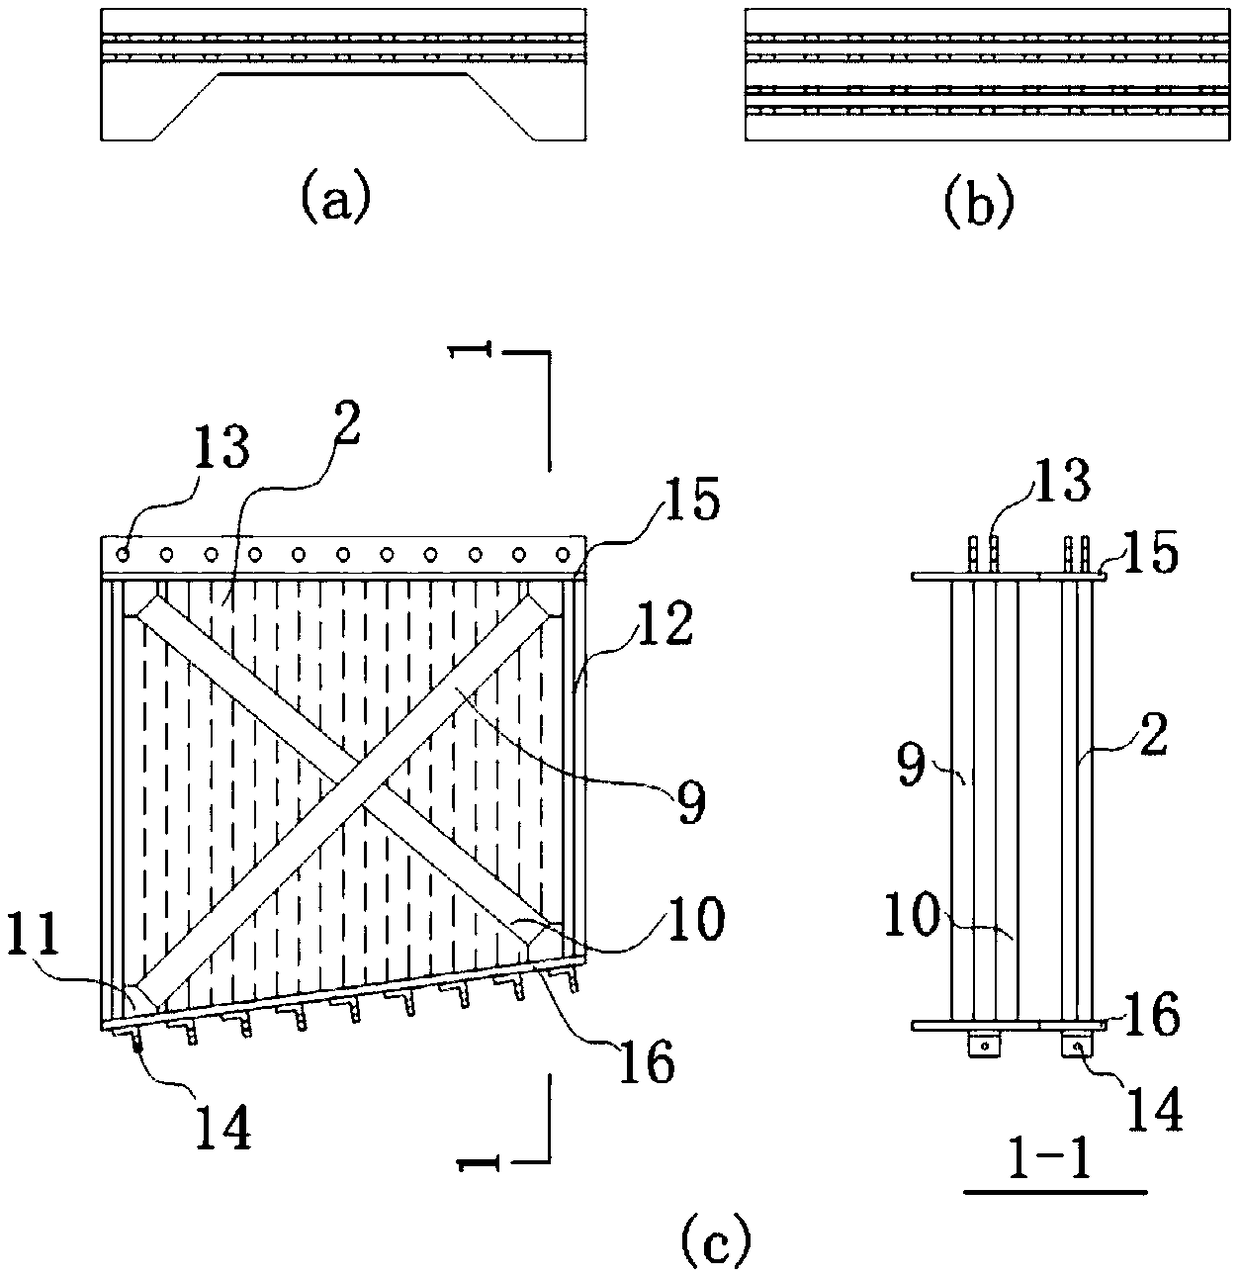 Construction method of long-span composite beam bridge with steel truss and corrugated steel web